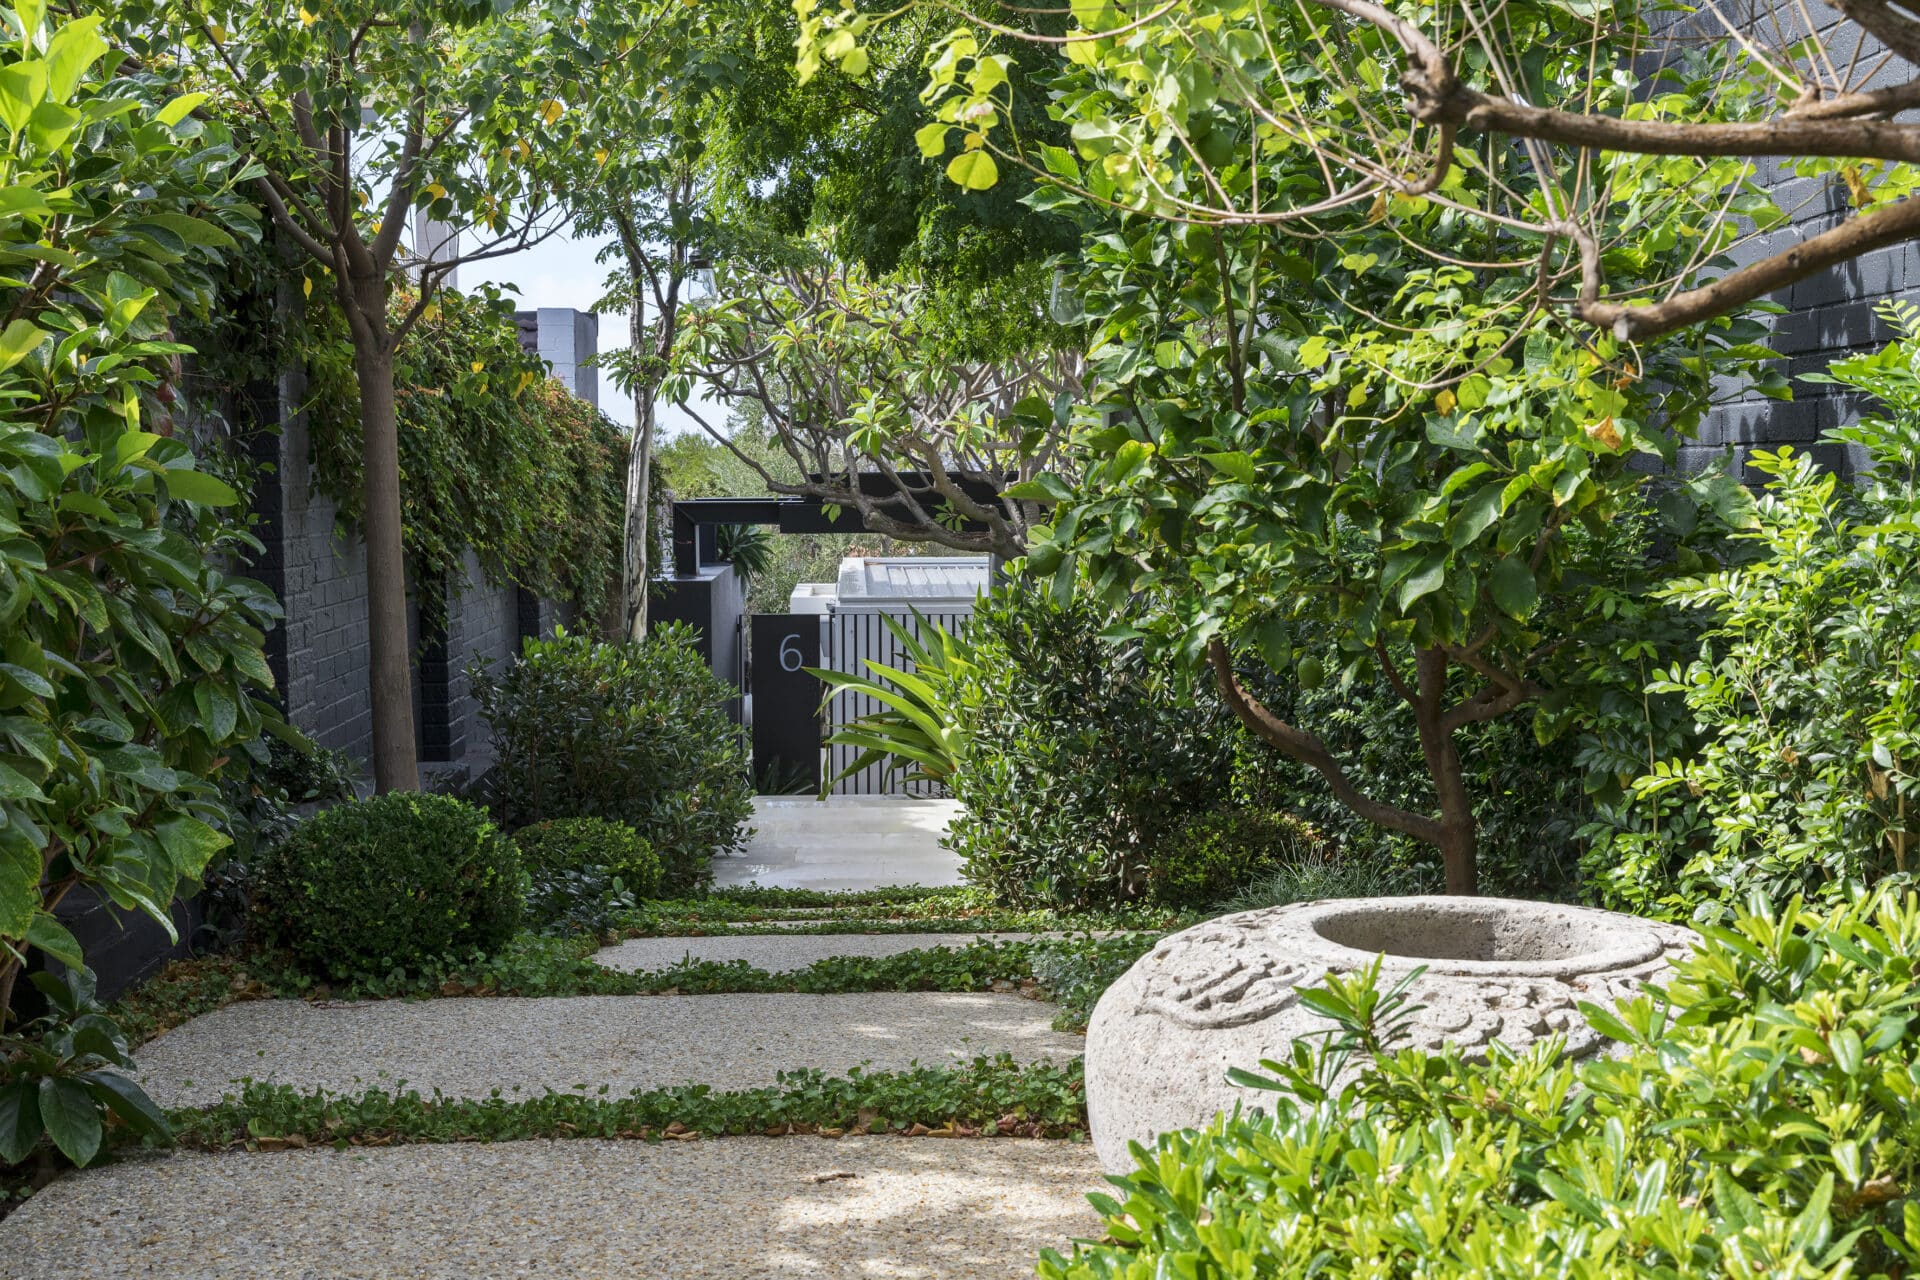 exposed aggregate steppers in a mosman park garden